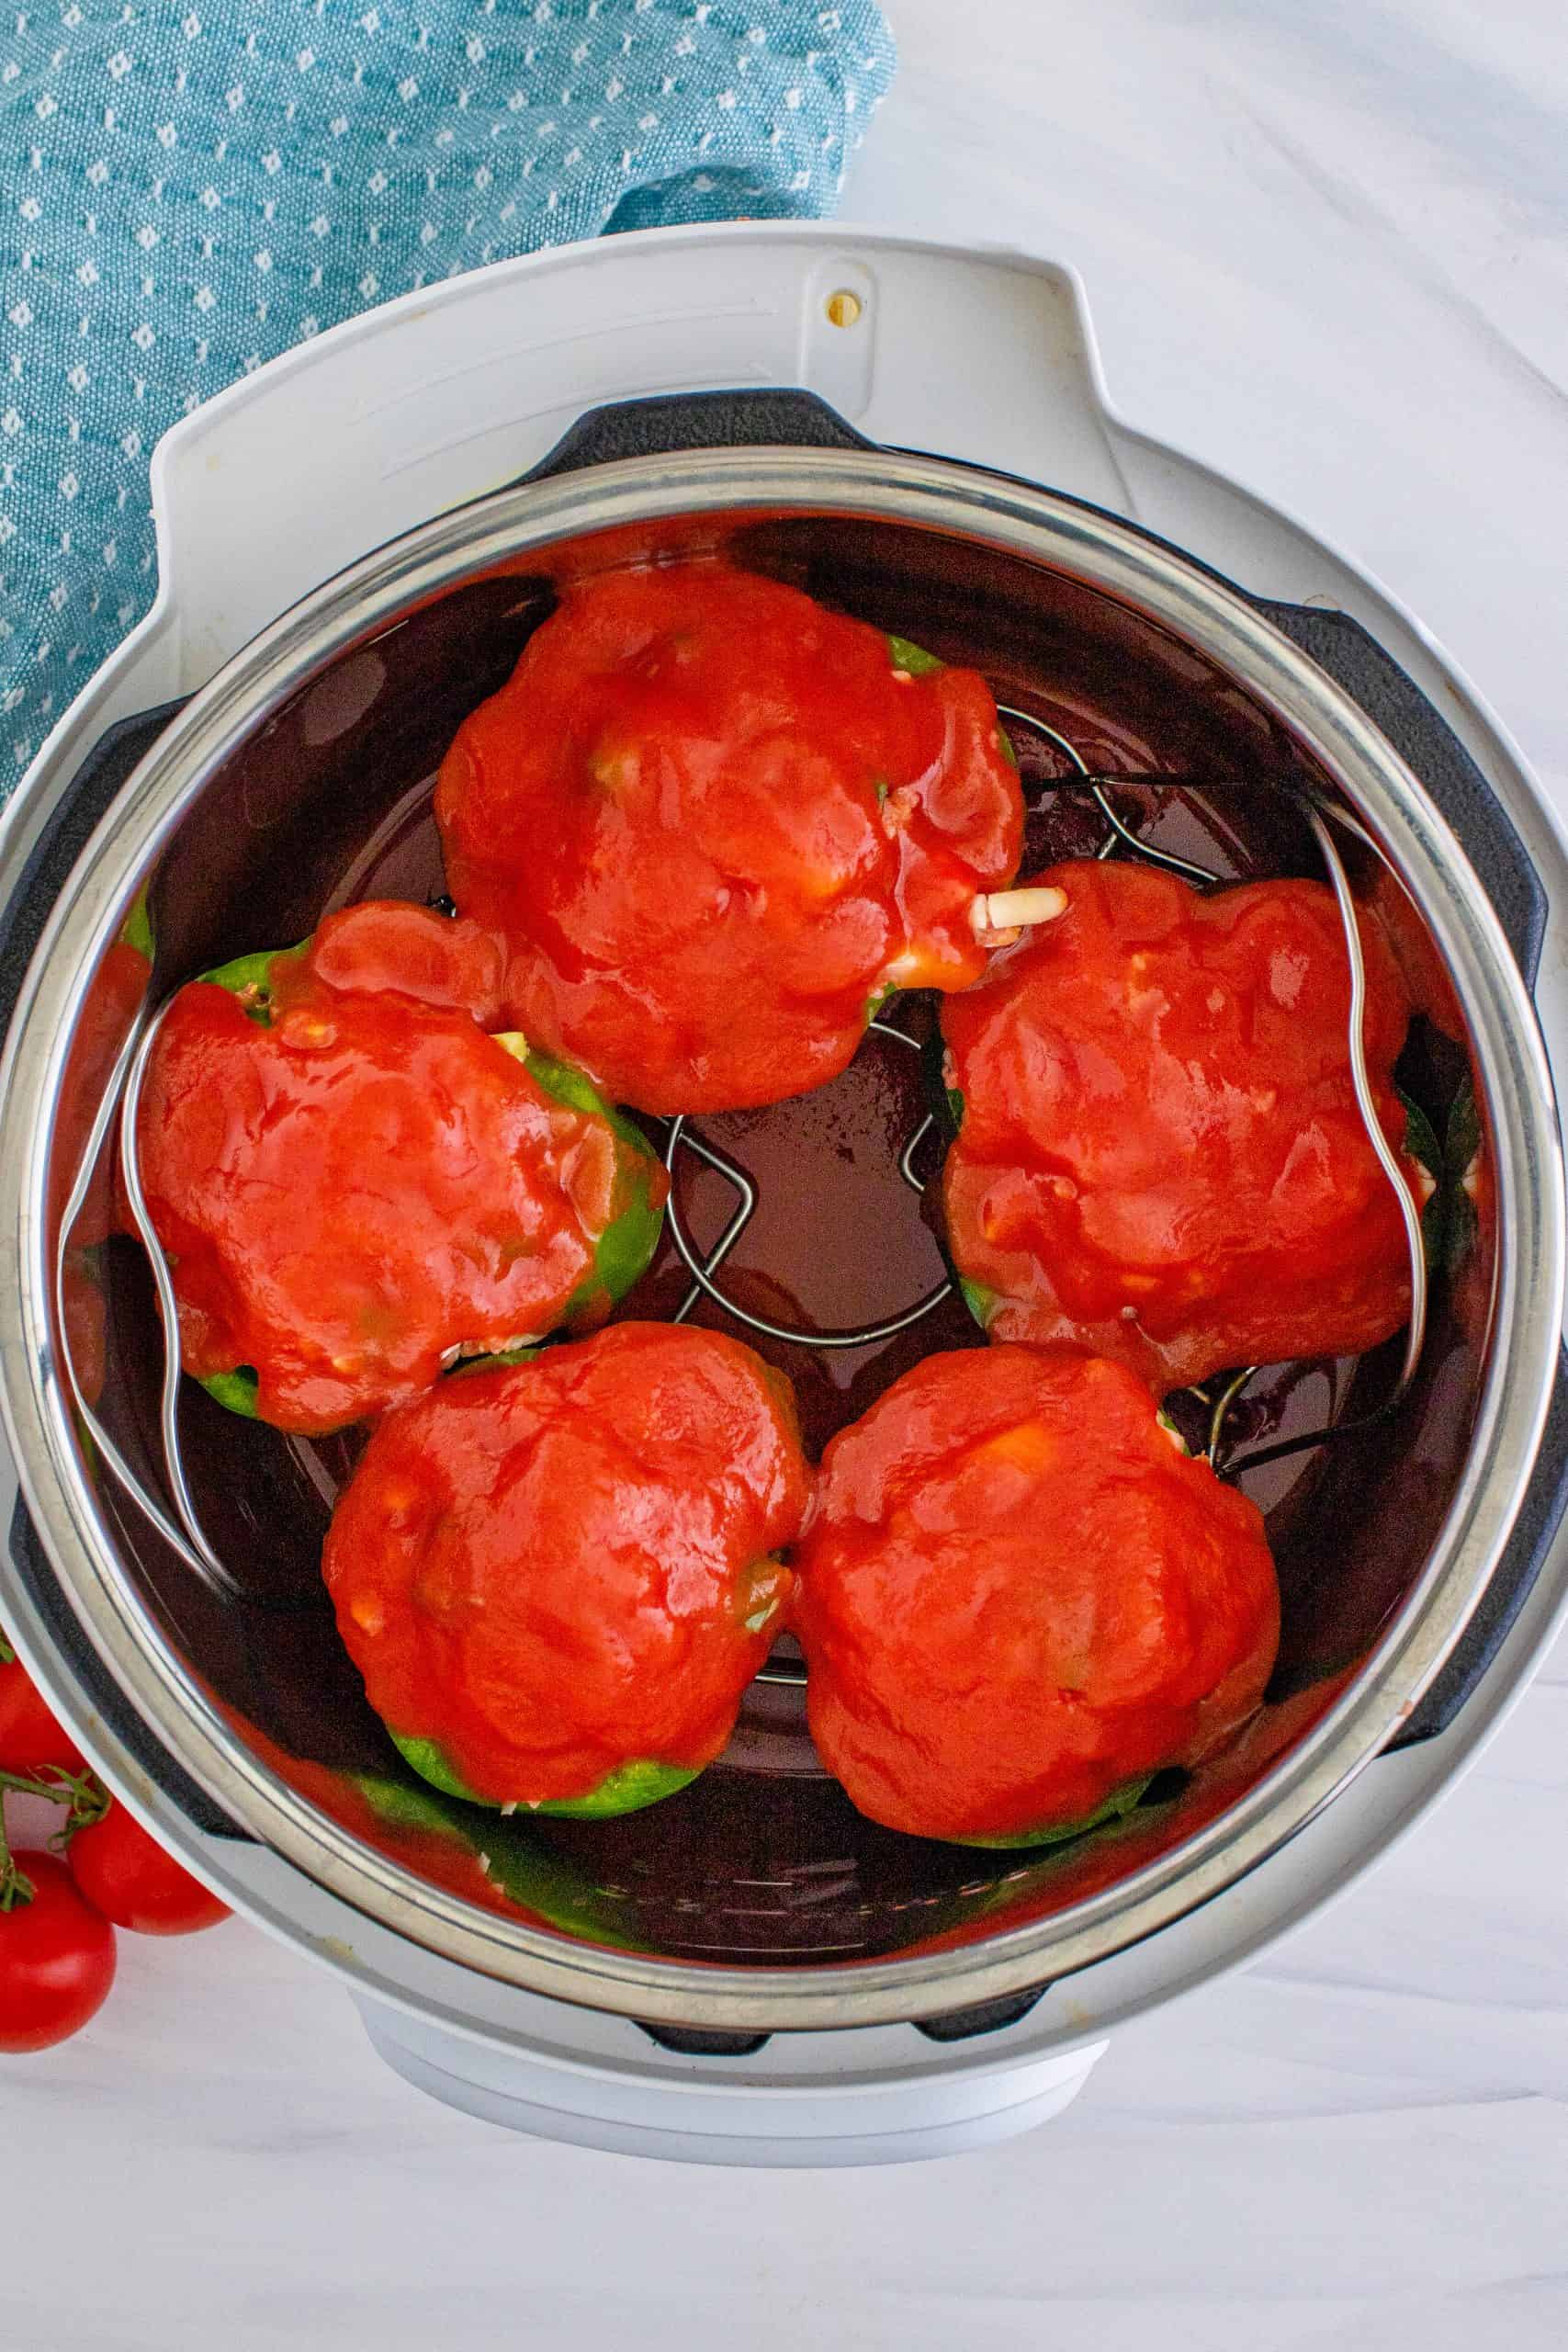 tomato sauce evenly spread on top of stuffed peppers.